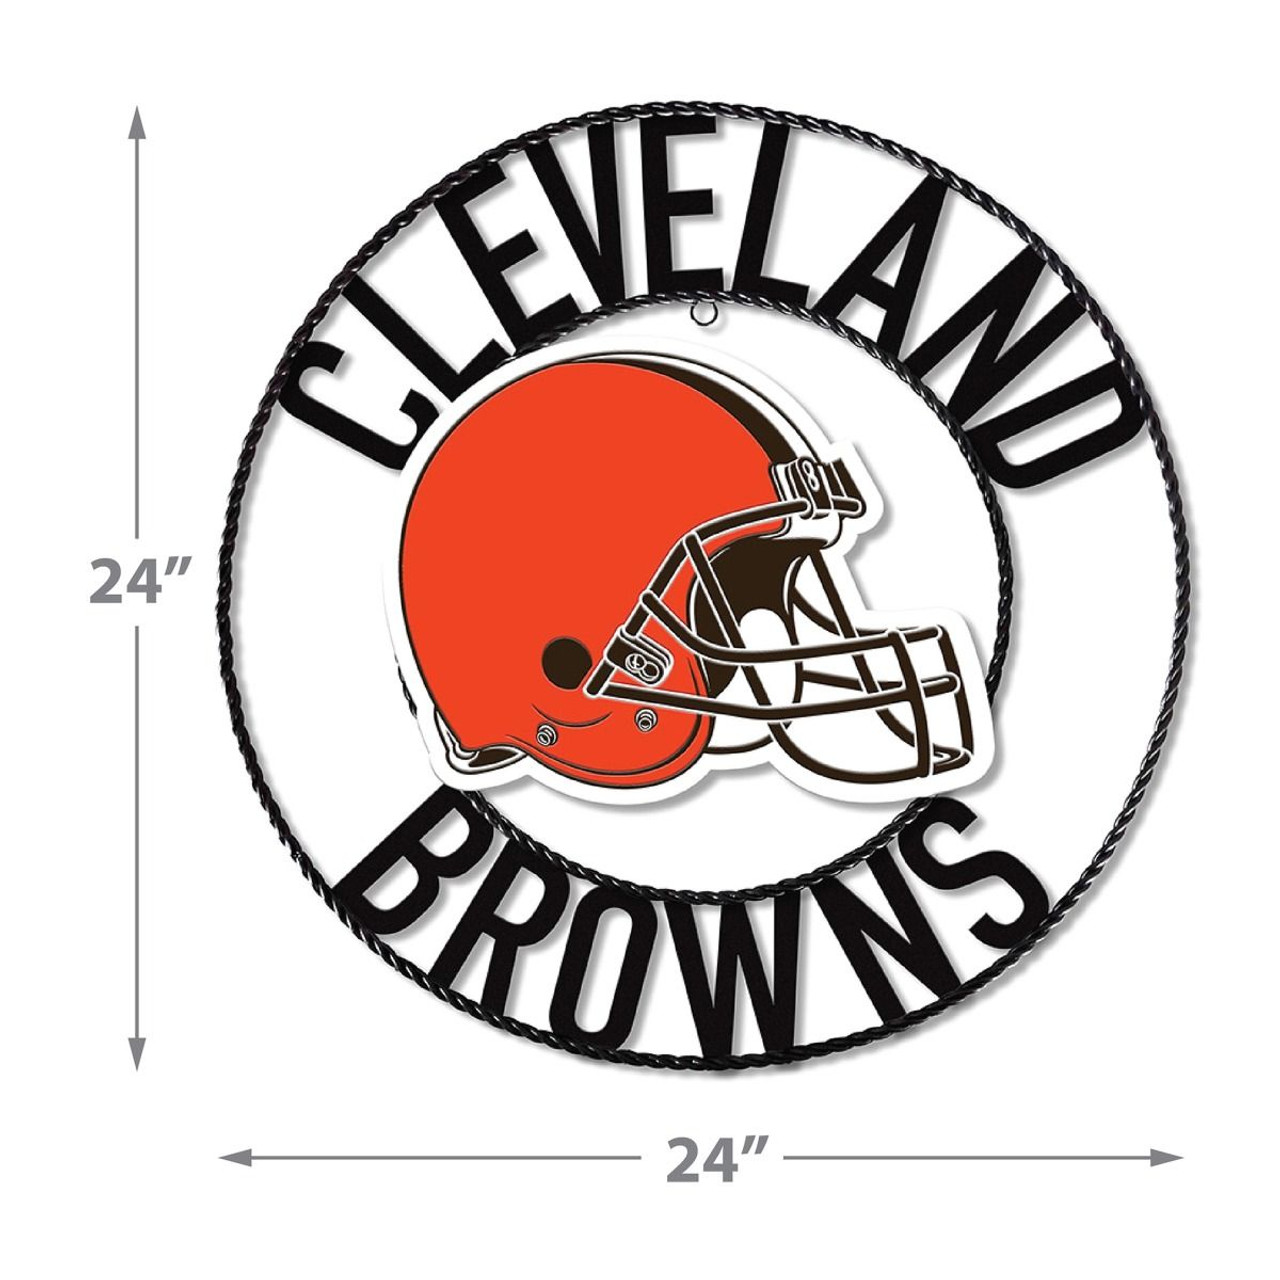 Cleveland Browns, CLE,  24", WI, Wrought Iron, Wall Art, 584-1020, Imperial, NFL, 720801132686